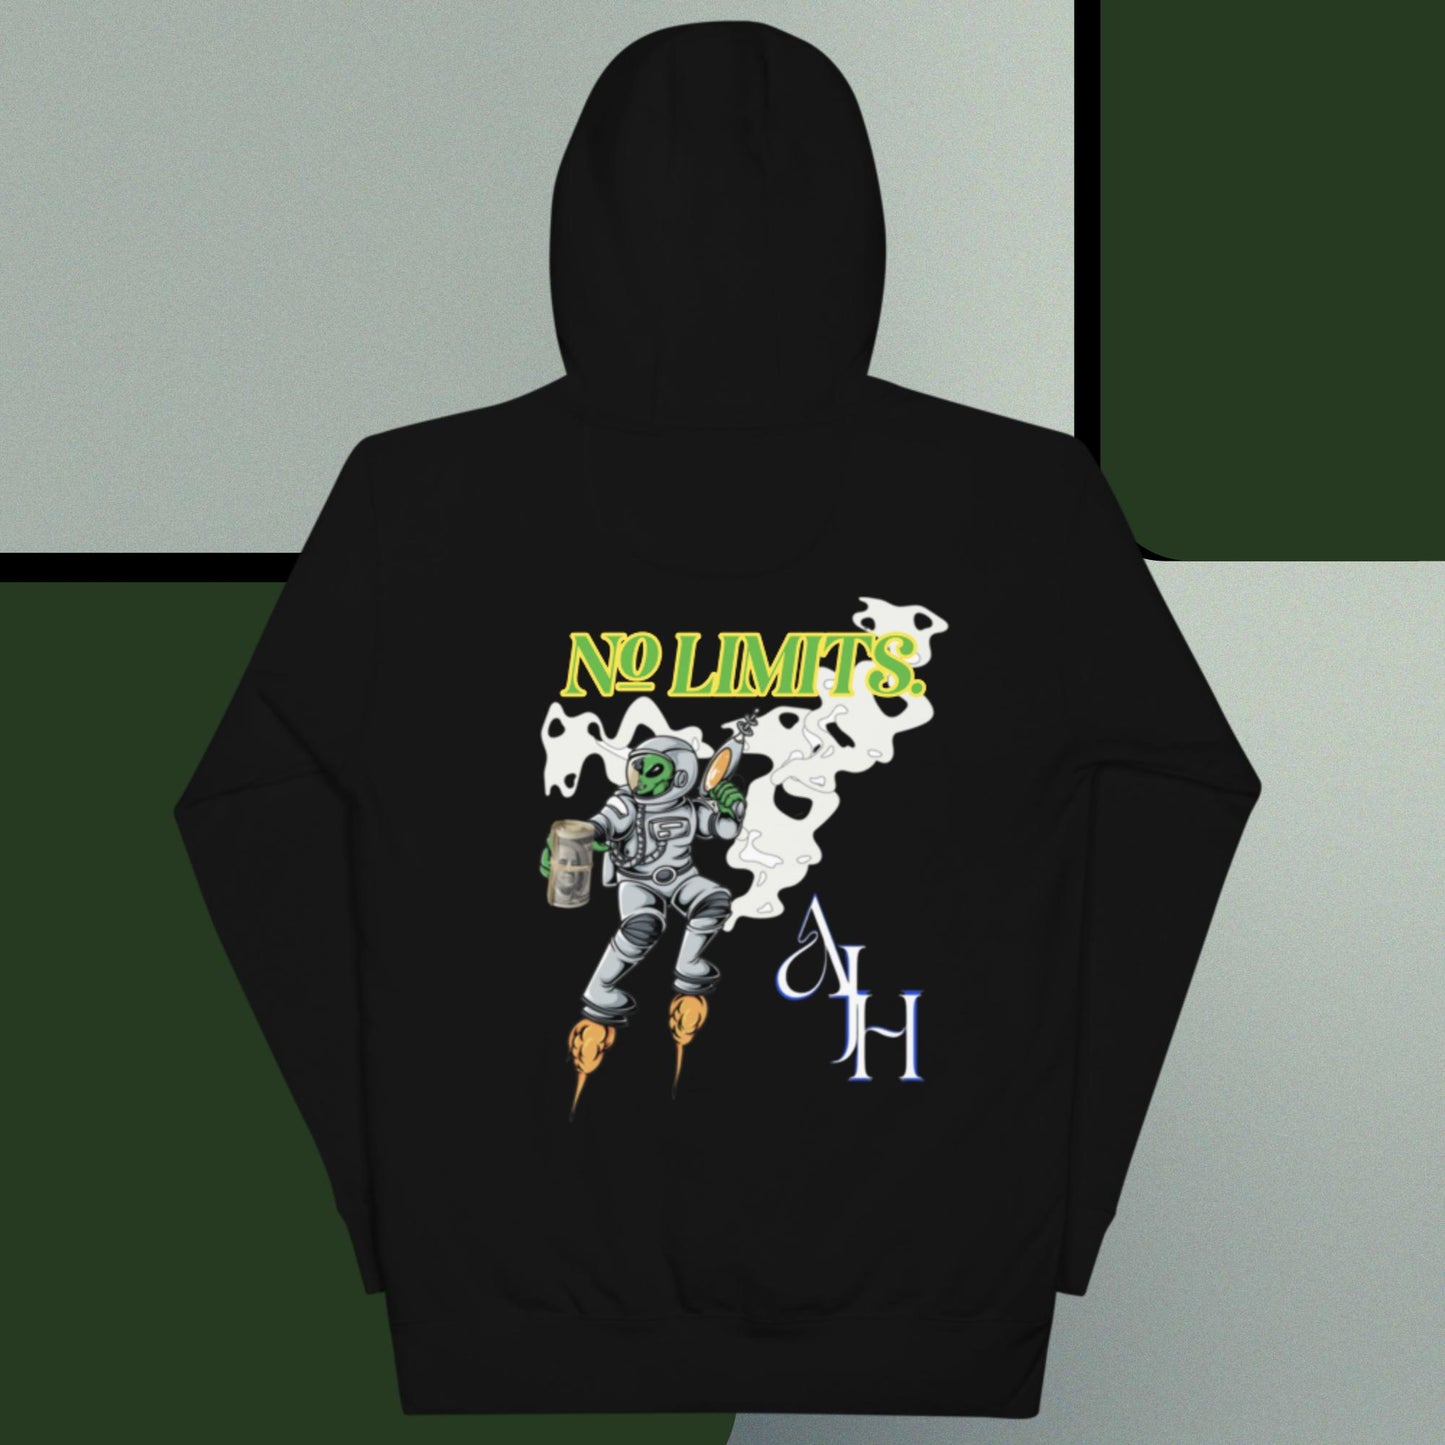 "NO LIMITS." ALL JUST HUSTLE OFFICIAL HOODIE